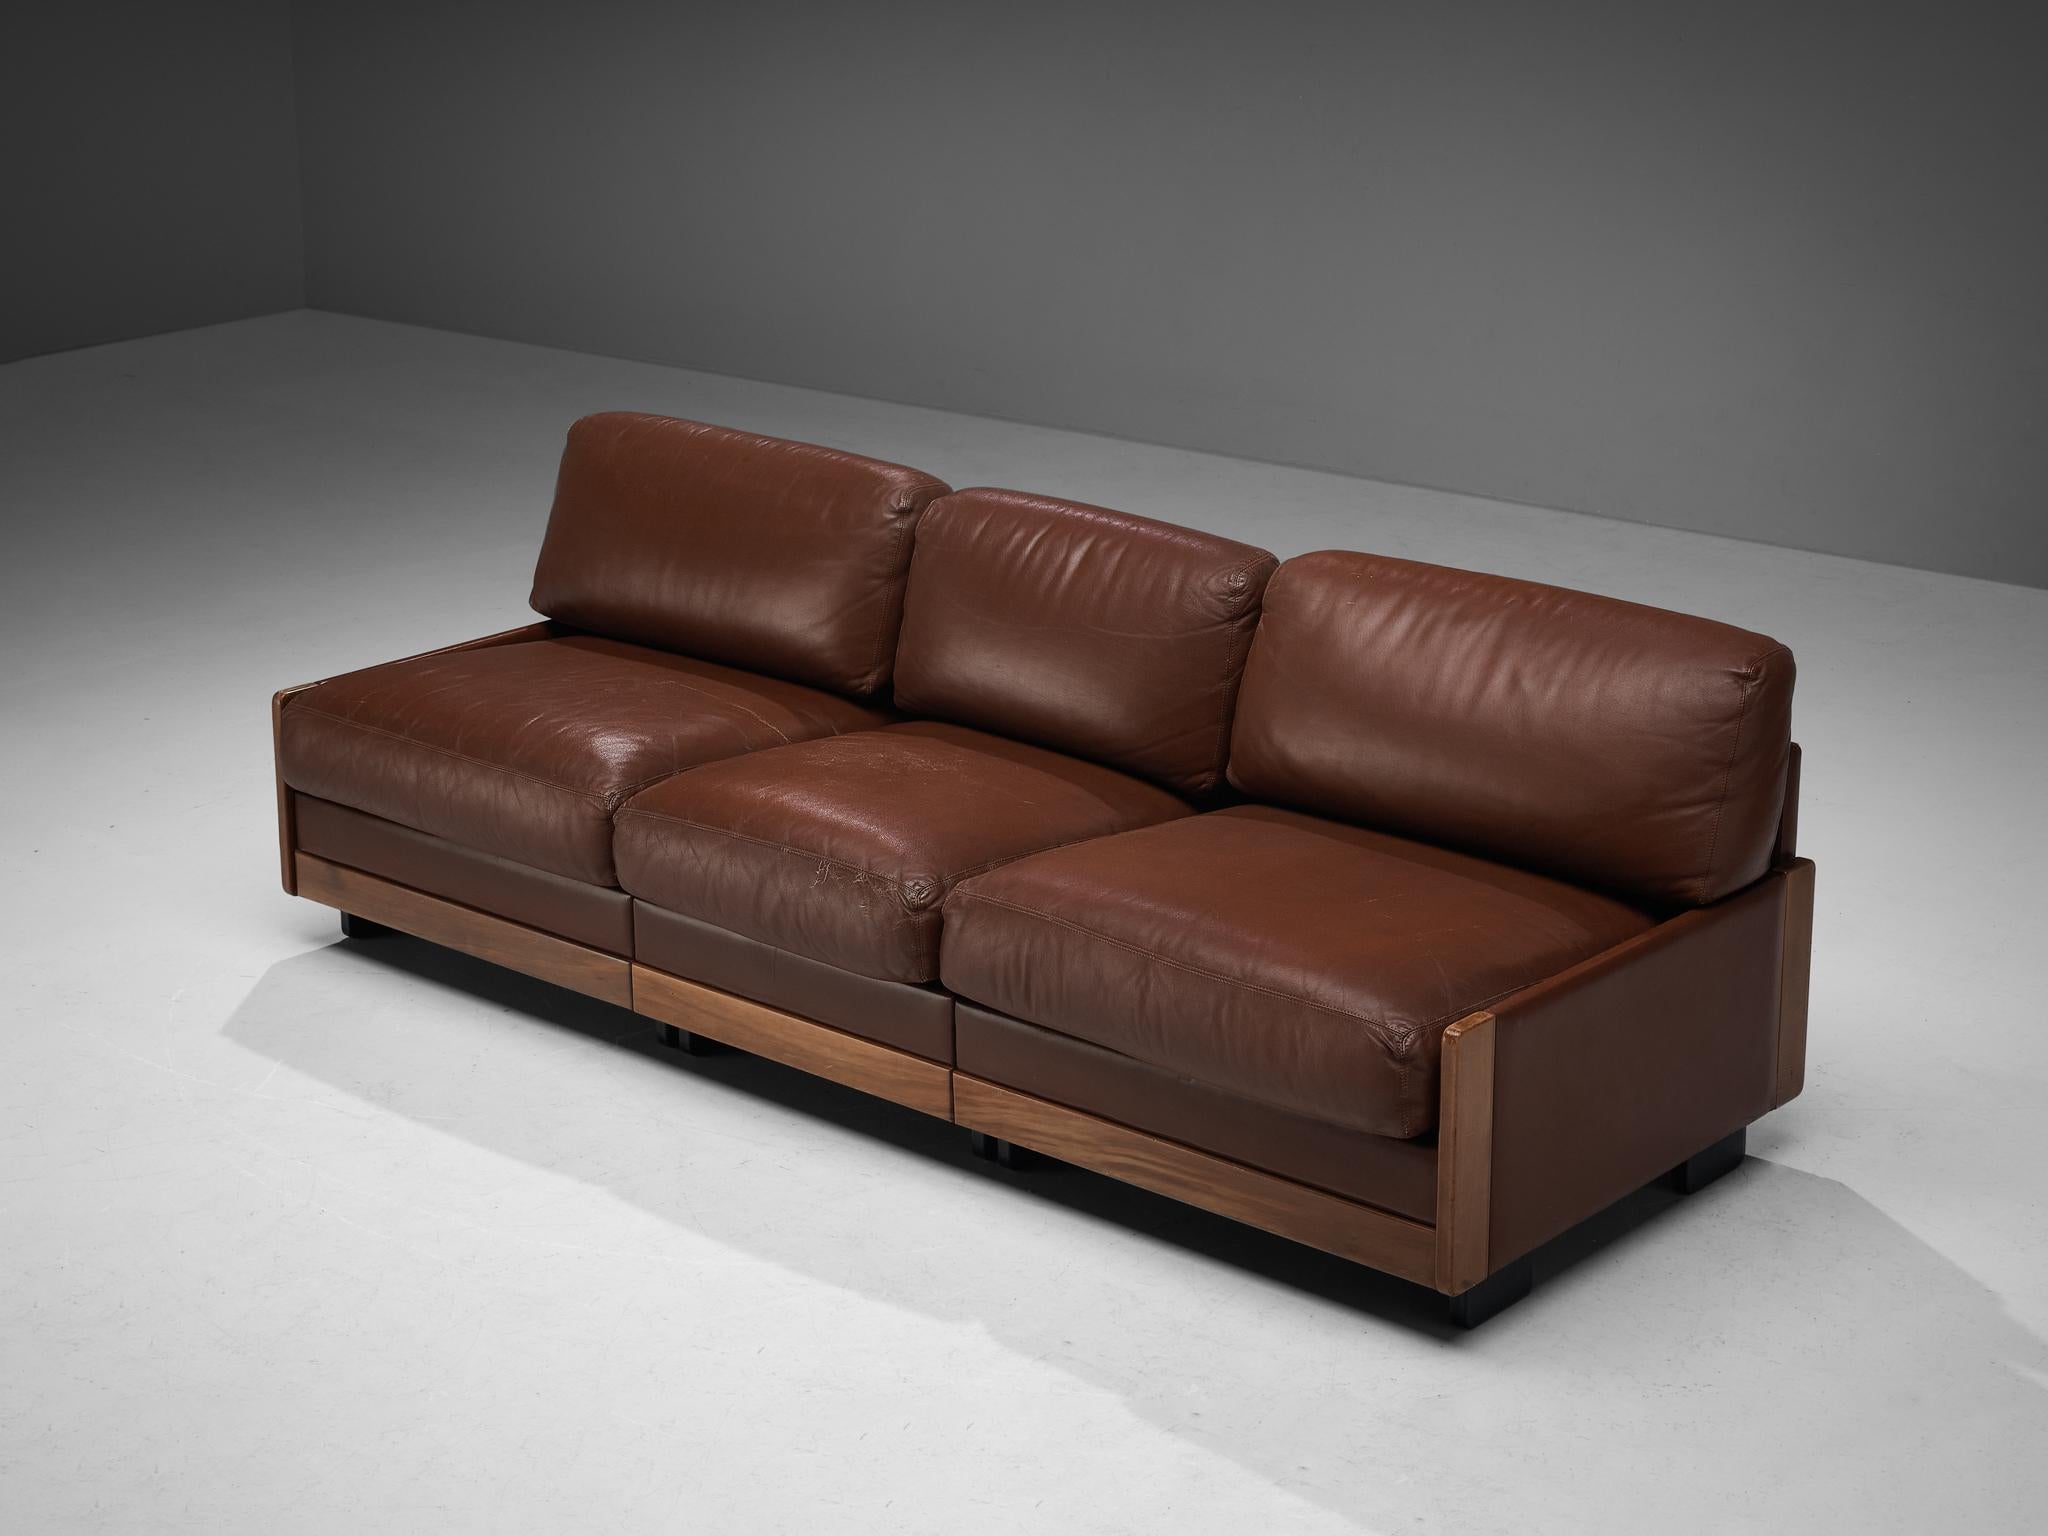 Afra & Tobia Scarpa for Cassina, three-seat sofa, model '920', brown leather, walnut, Italy, 1966. 

This high quality sofa is designed by Afra & Tobia Scarpa for Cassina in 1966. The design is bulky yet simple and very comfortable. A grand and